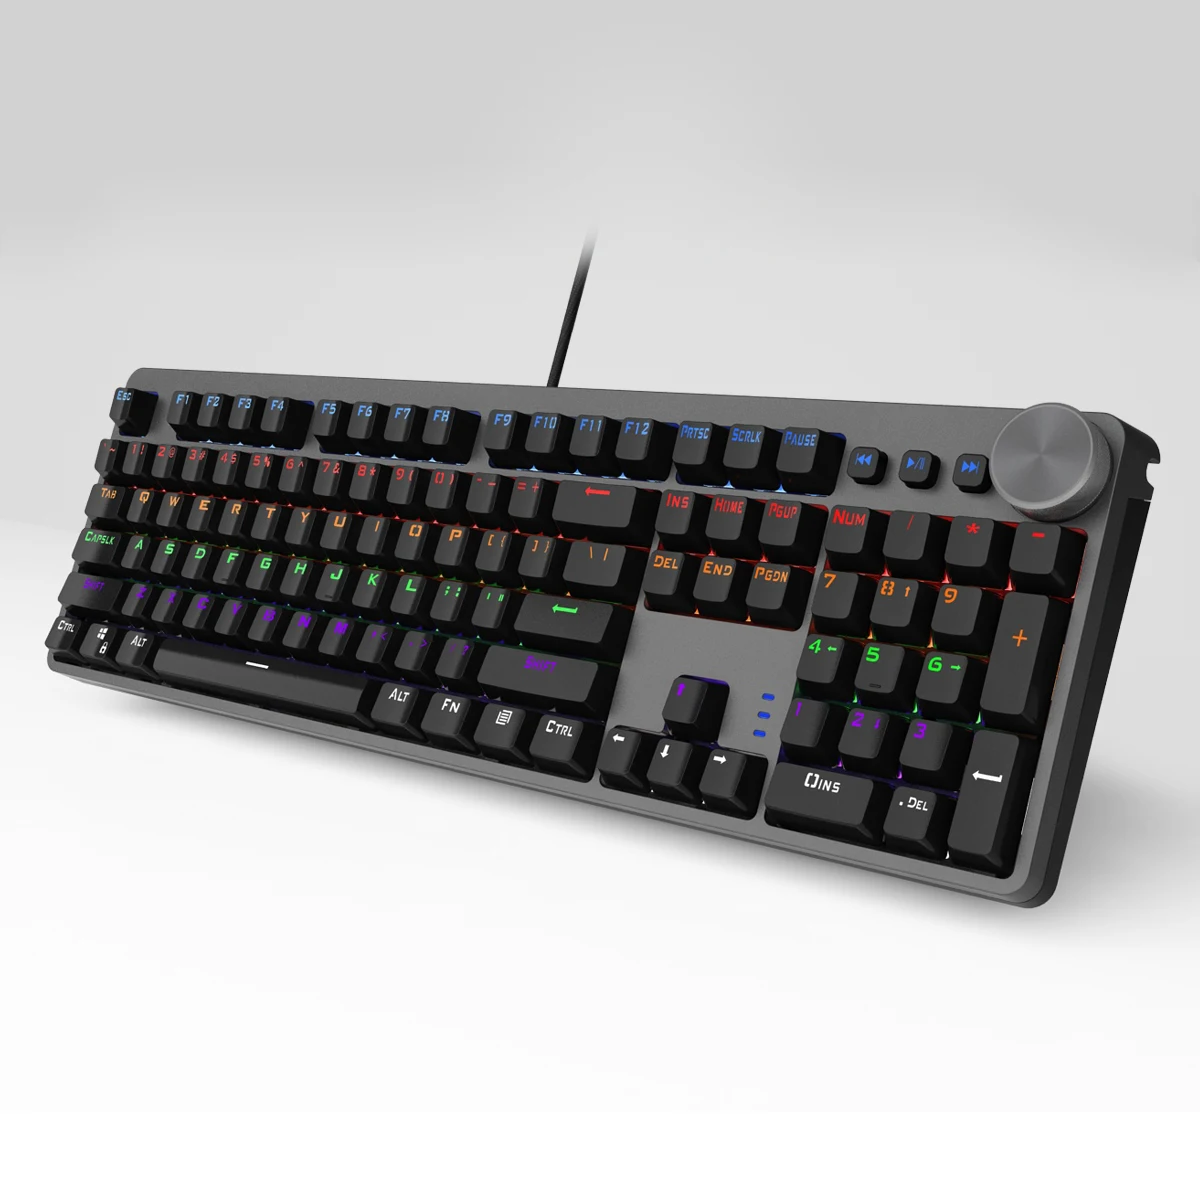 For Wired Gaming Mechanical Keyboard with 104 Keys, Mixed Backlight, Black and Gray With Multi-Function Knobs French/US